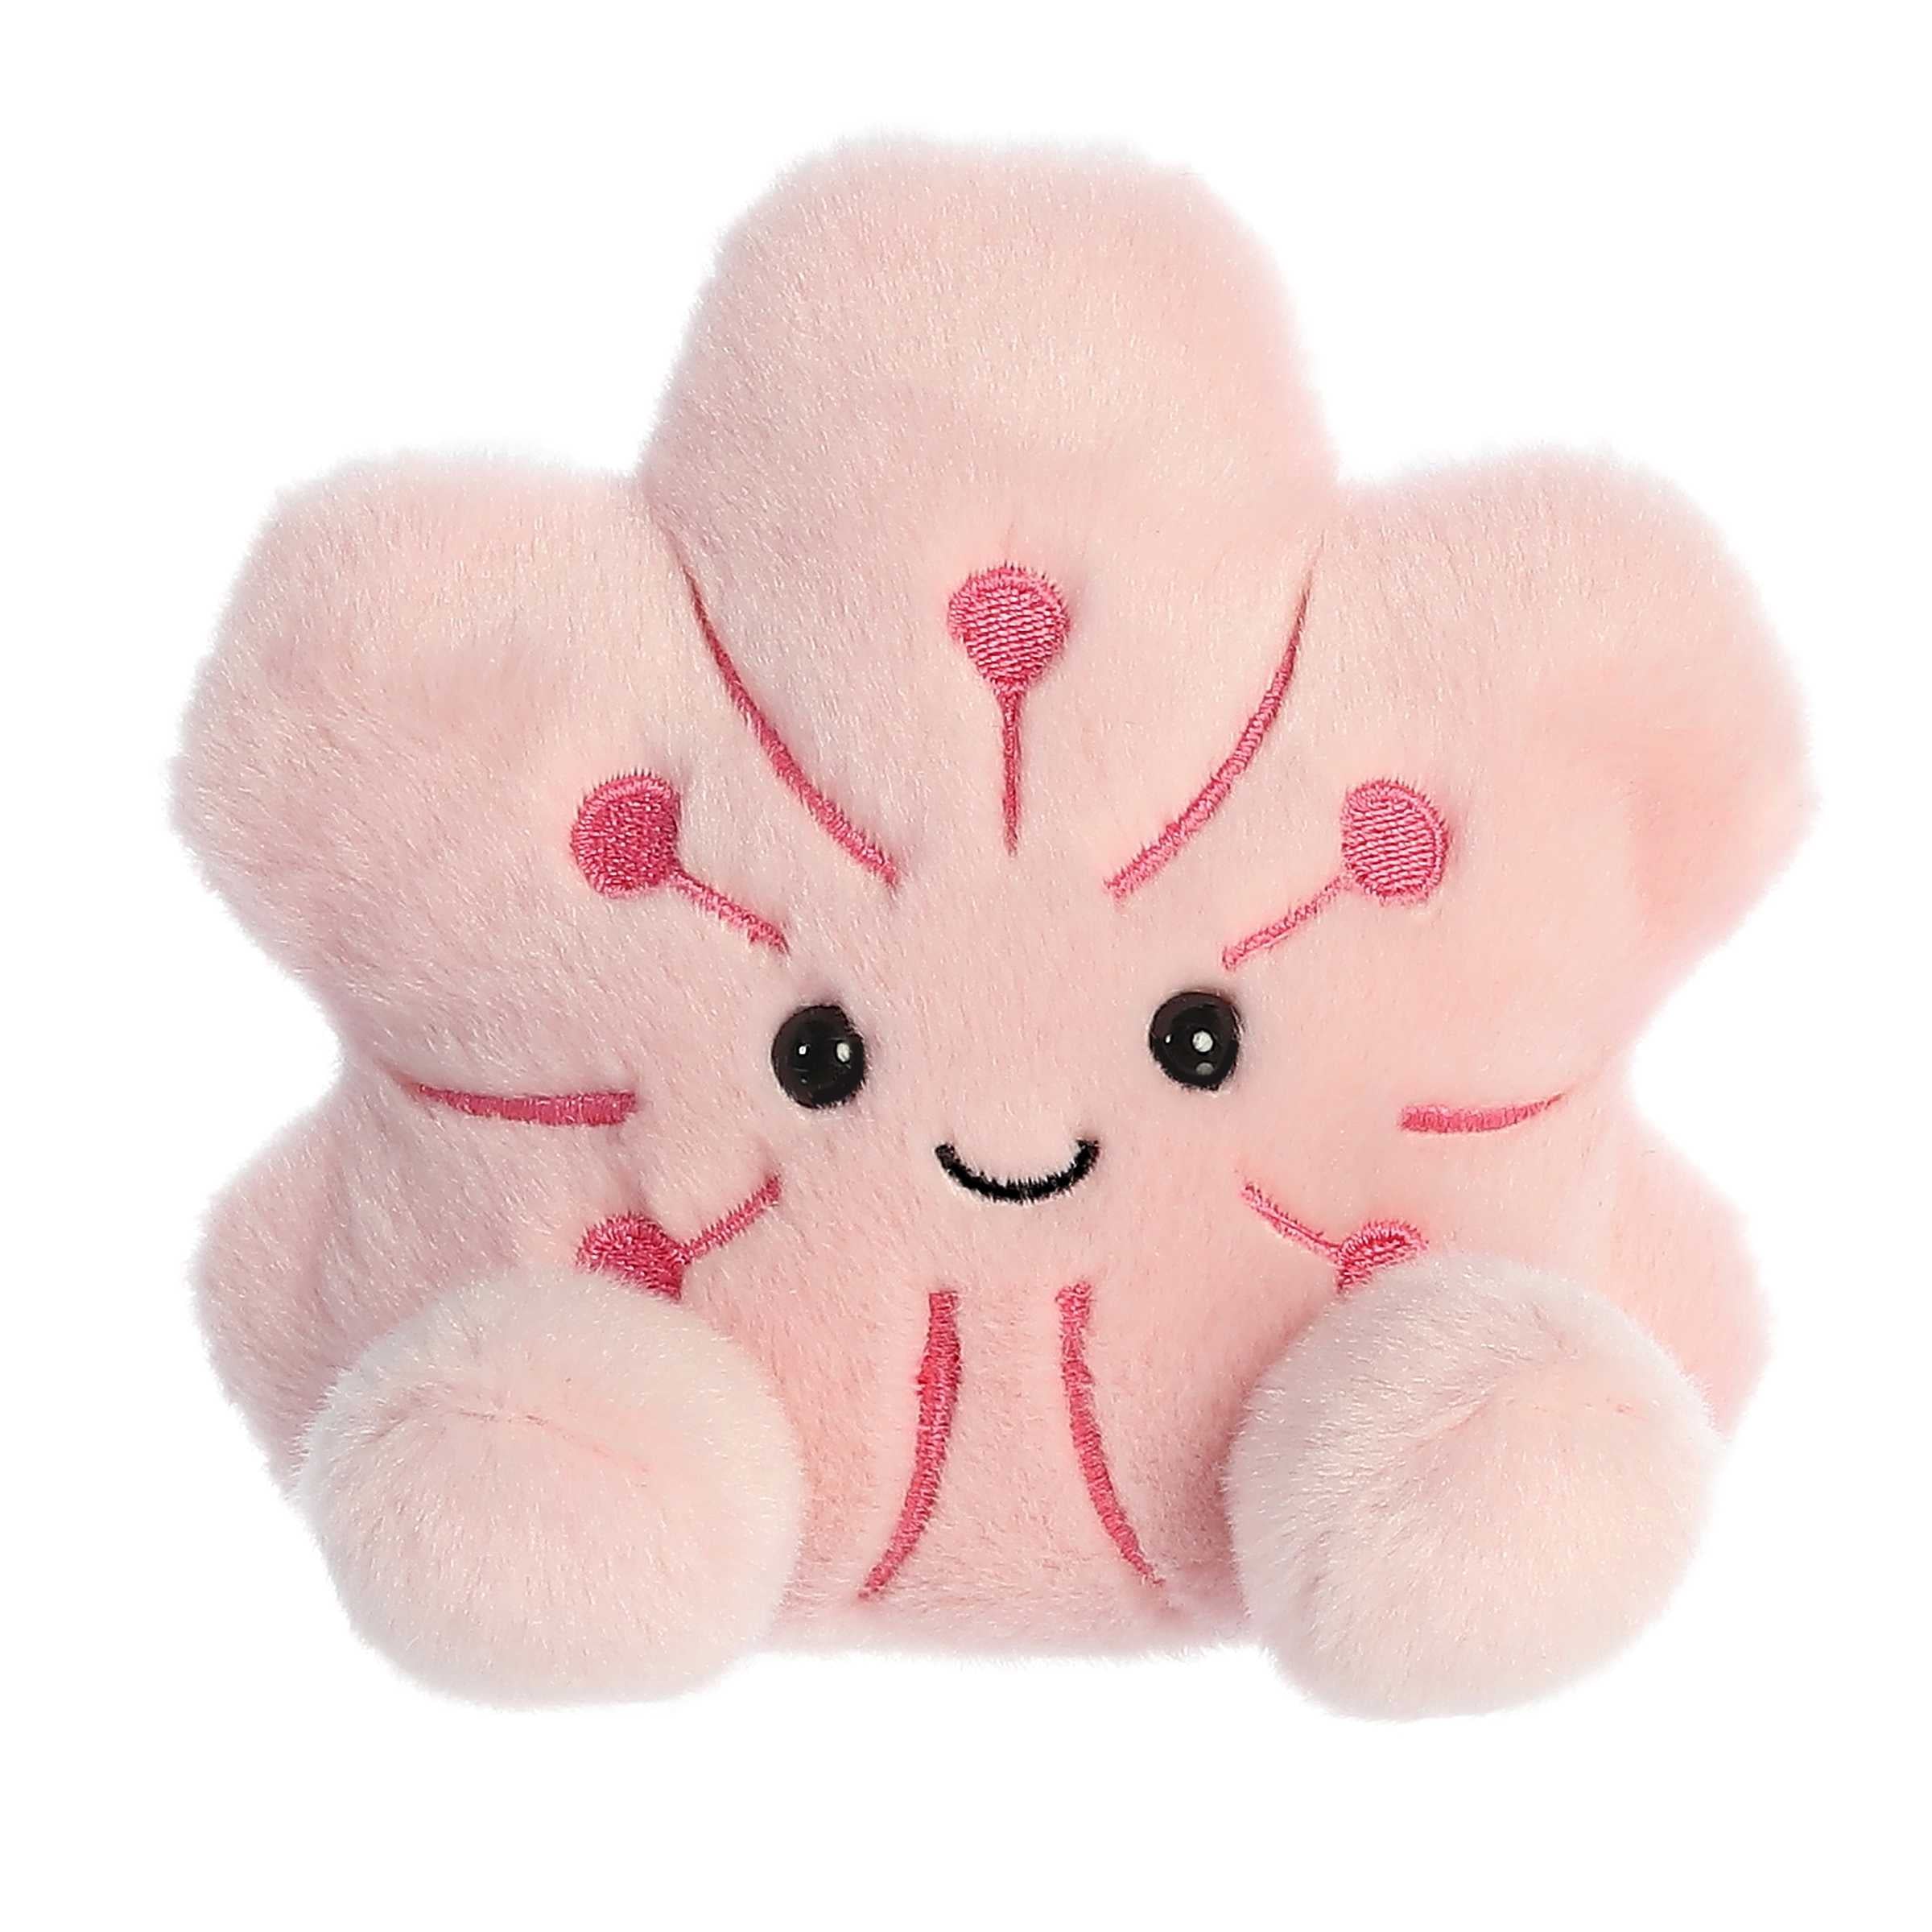 Mochi Sakura Flower from Palm Pals, with soft pink petals and embroidered details